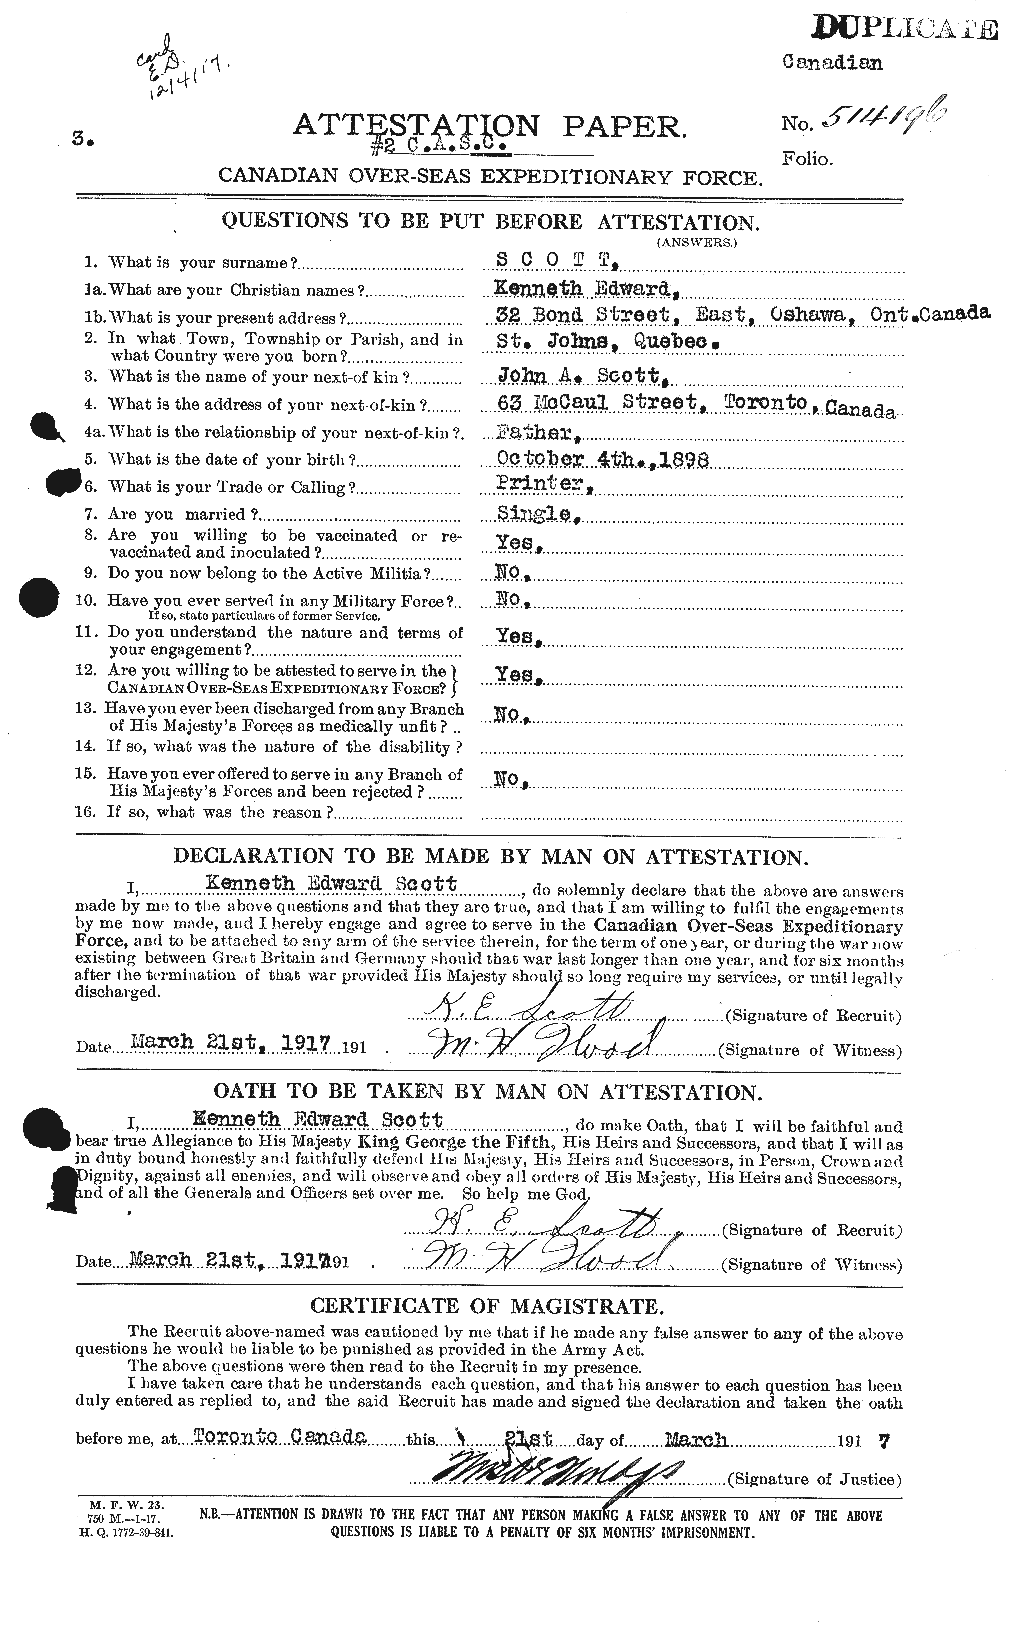 Personnel Records of the First World War - CEF 084153a